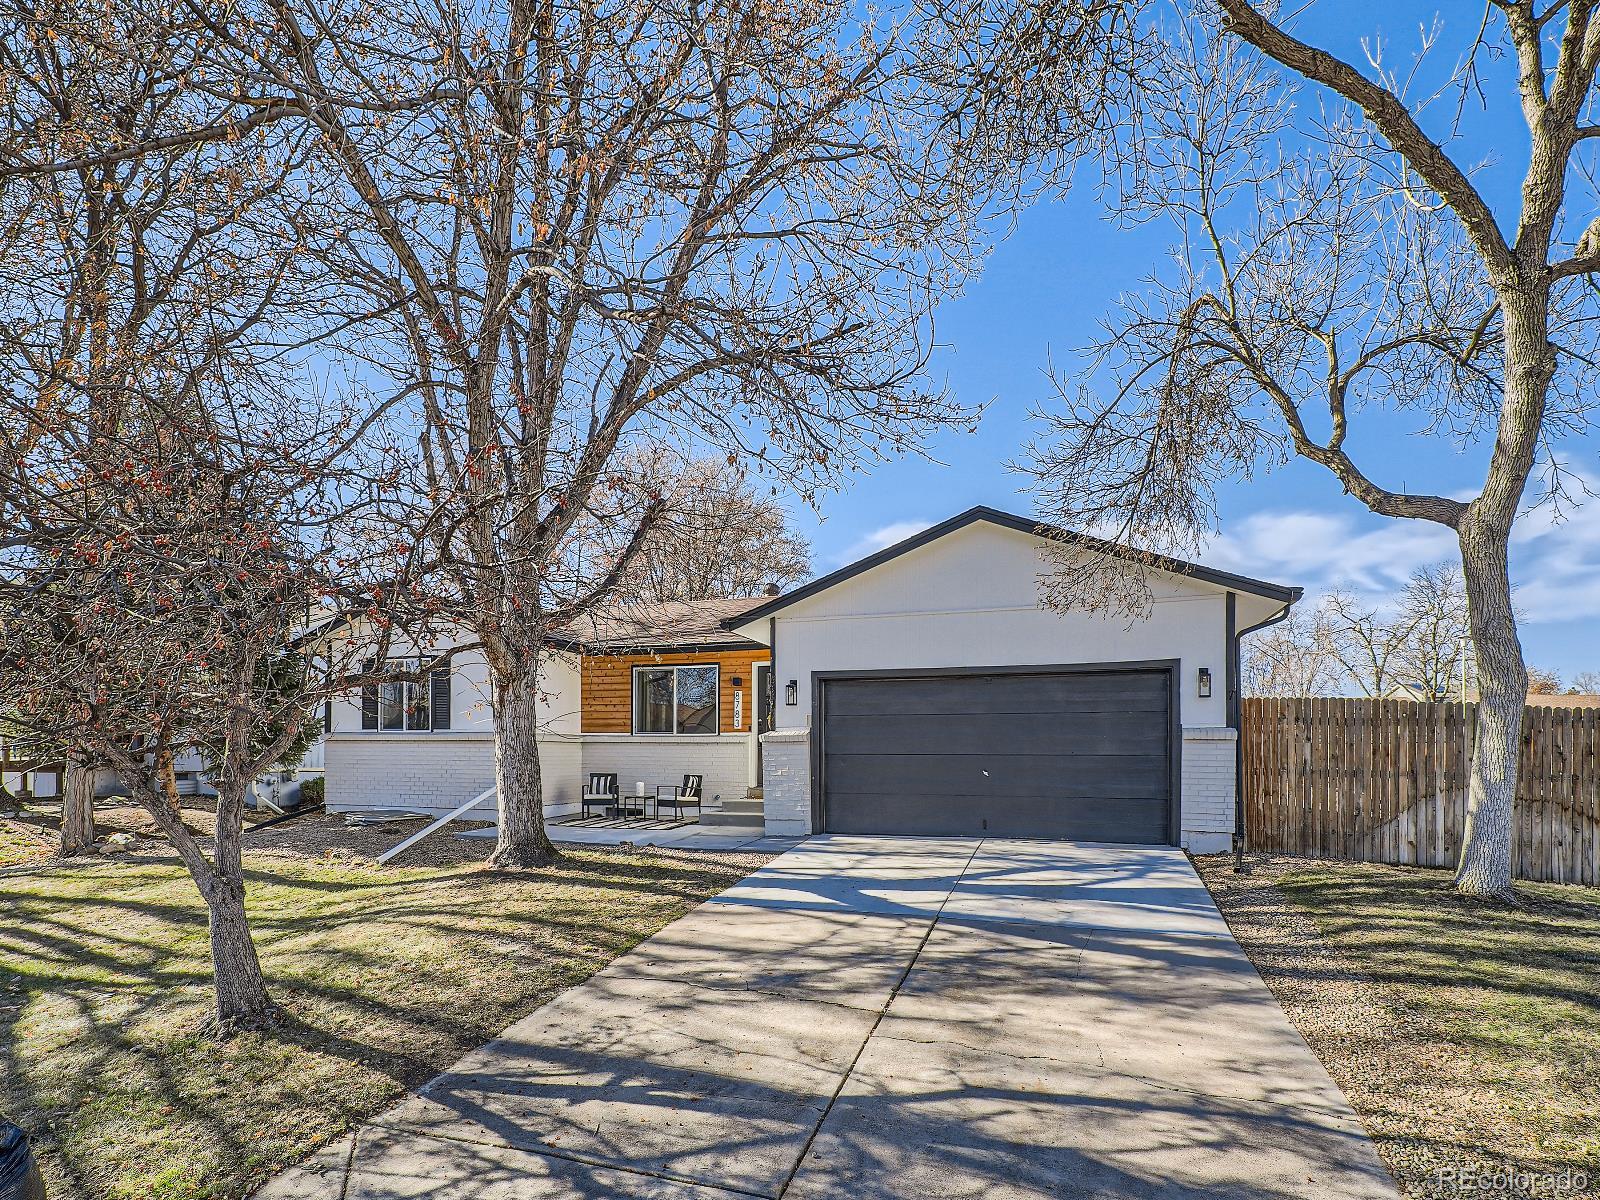 8783  everett court, Arvada sold home. Closed on 2024-01-22 for $631,000.